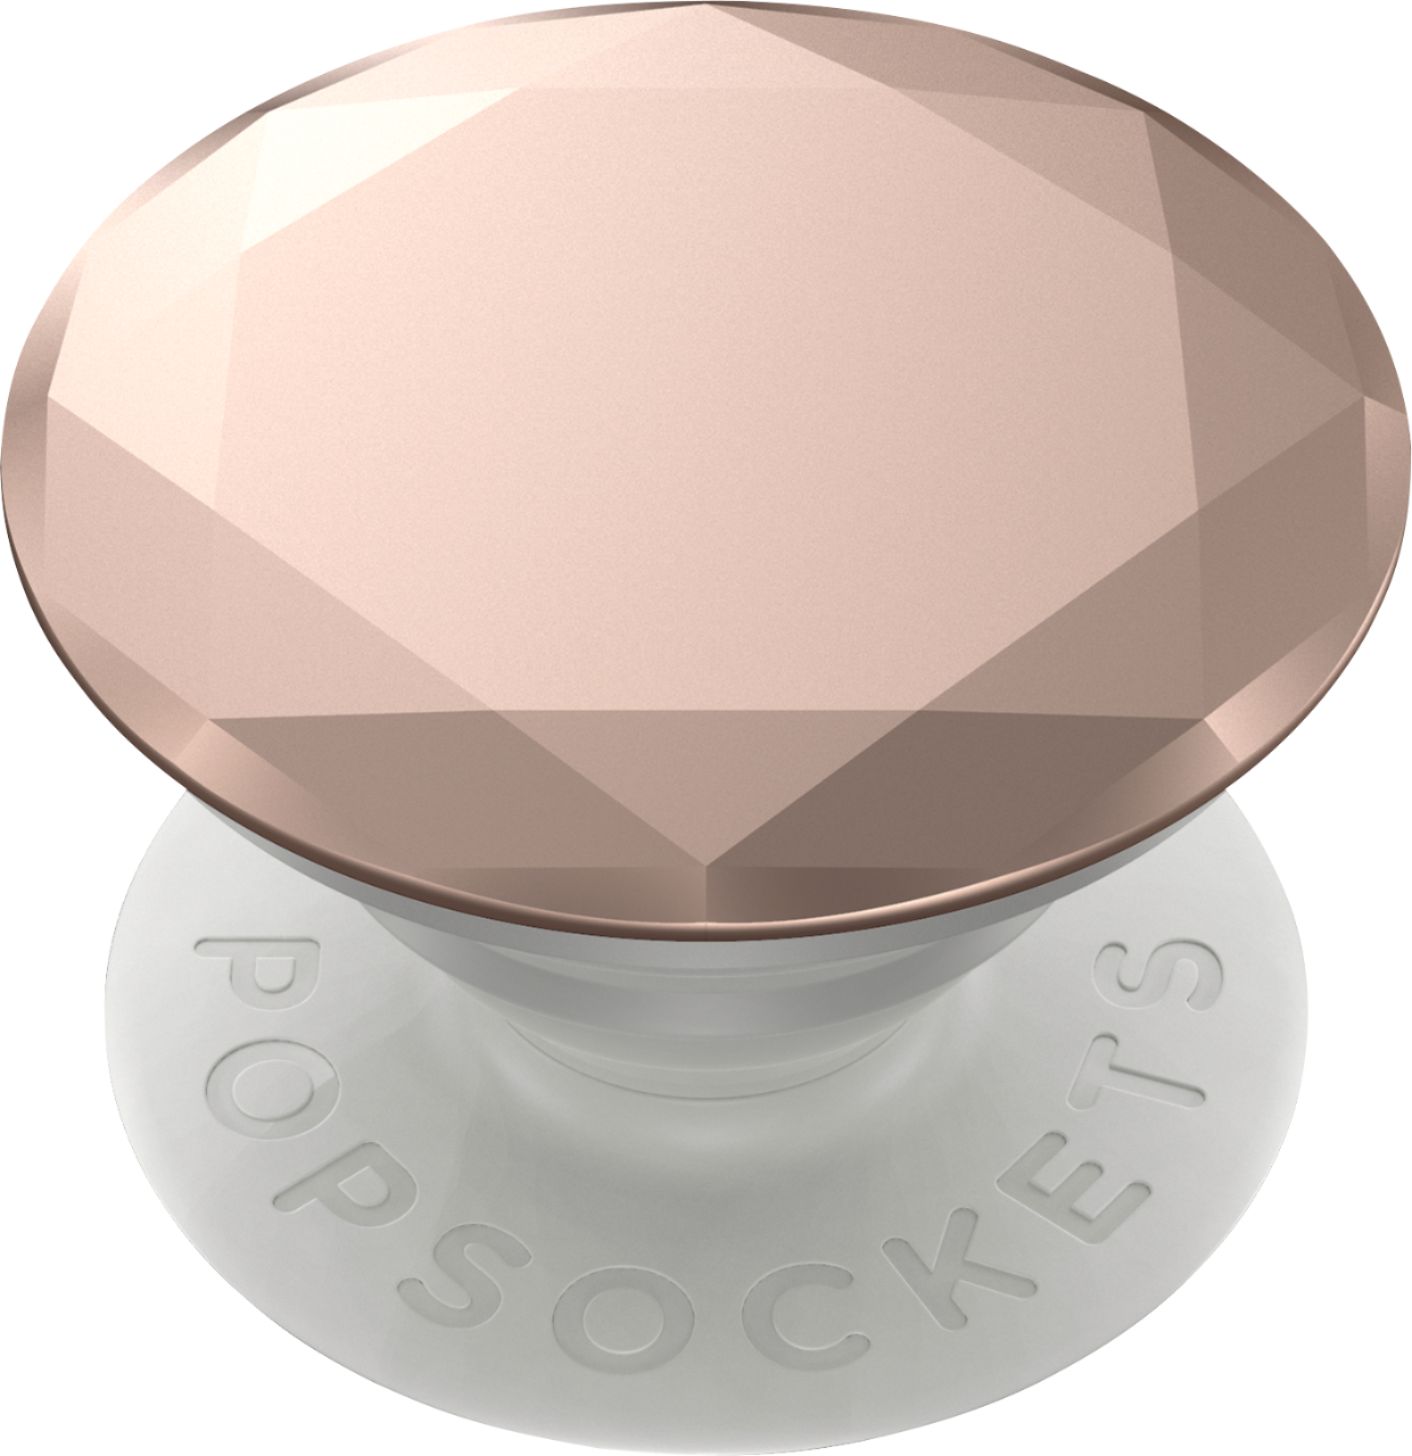 Angle View: PopSockets - PopGrip Premium Cell Phone Grip and Stand - Metallic Diamond Rose Gold